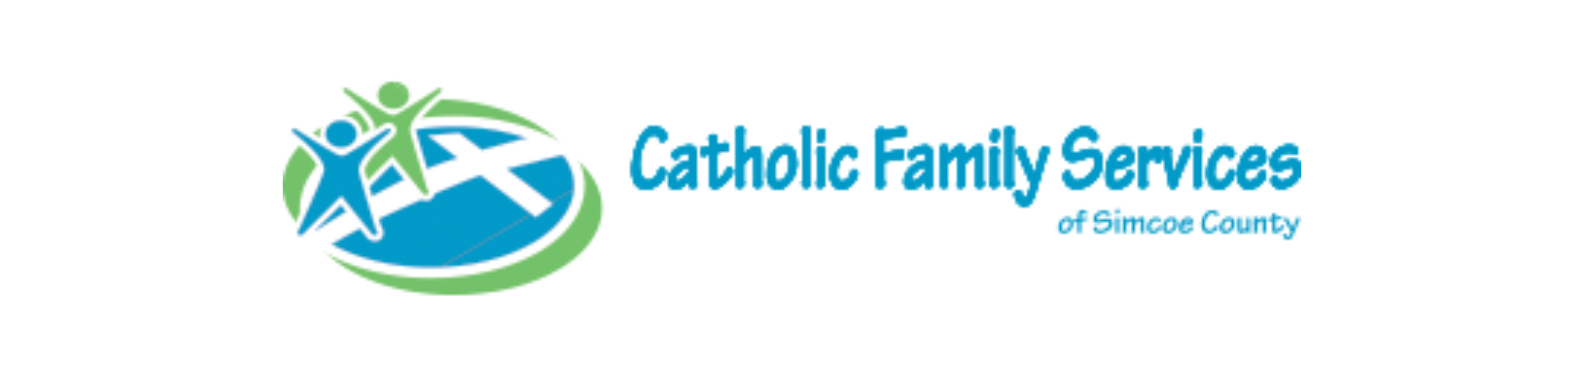 Round logo and text Catholic Family Services of Simcoe County